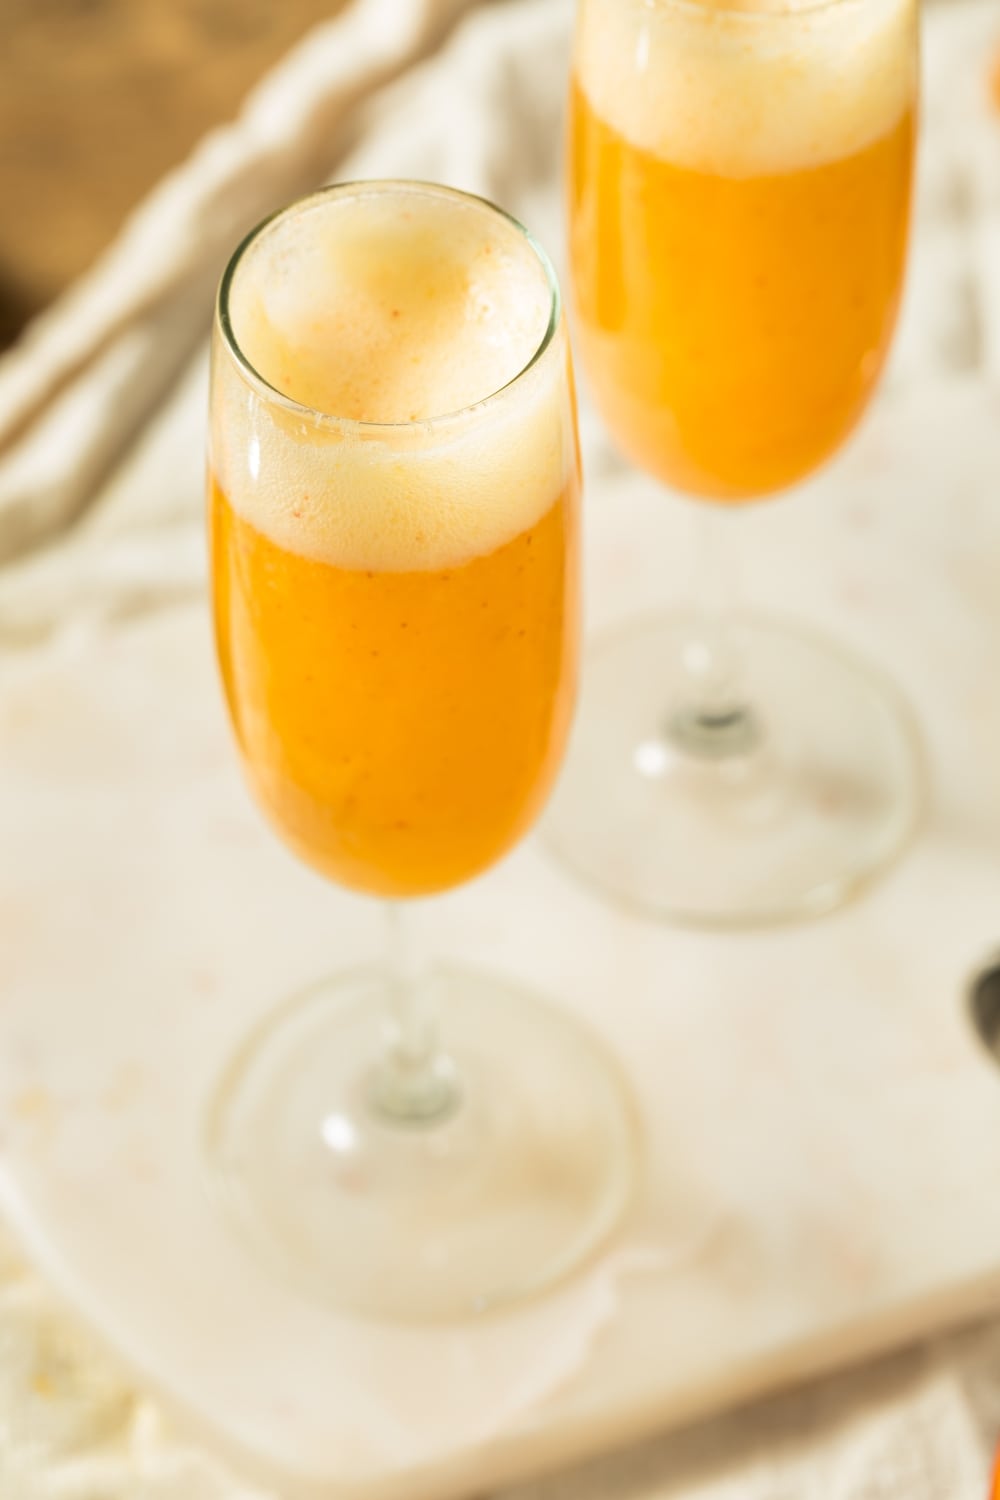 Homemade Bubbly Bellini Cocktails on Wine Glasses